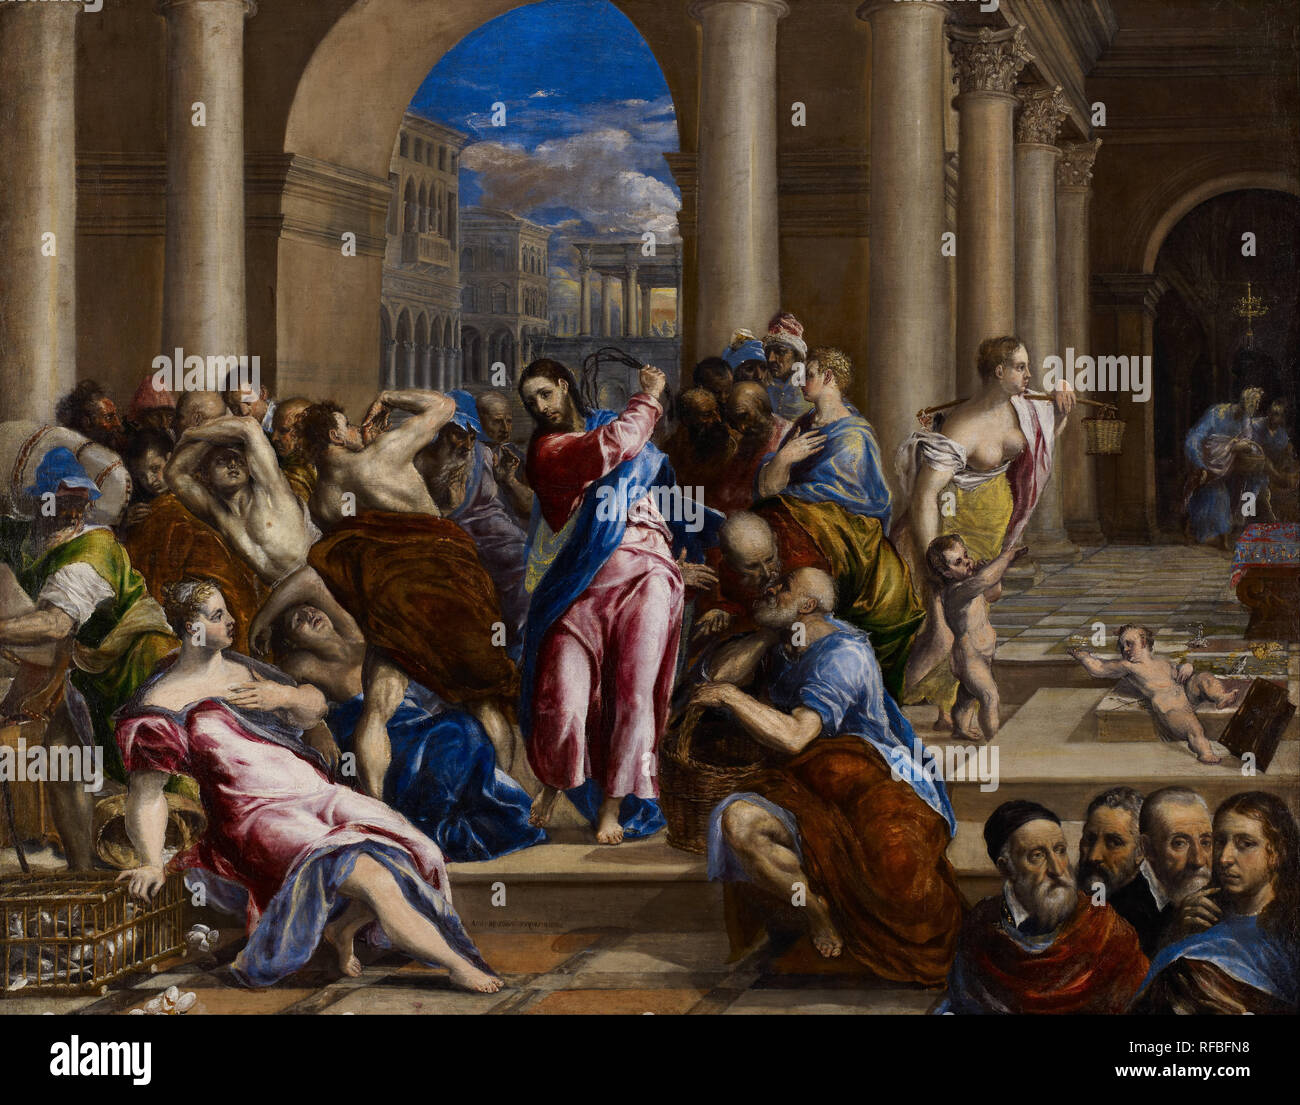 Christ driving the money-changers from the Temple. Date/Period: Ca. 1570. Painting. Oil on canvas. Height: 116.8 cm (46 in); Width: 149.8 cm (59 in). Author: GRECO, EL. Stock Photo